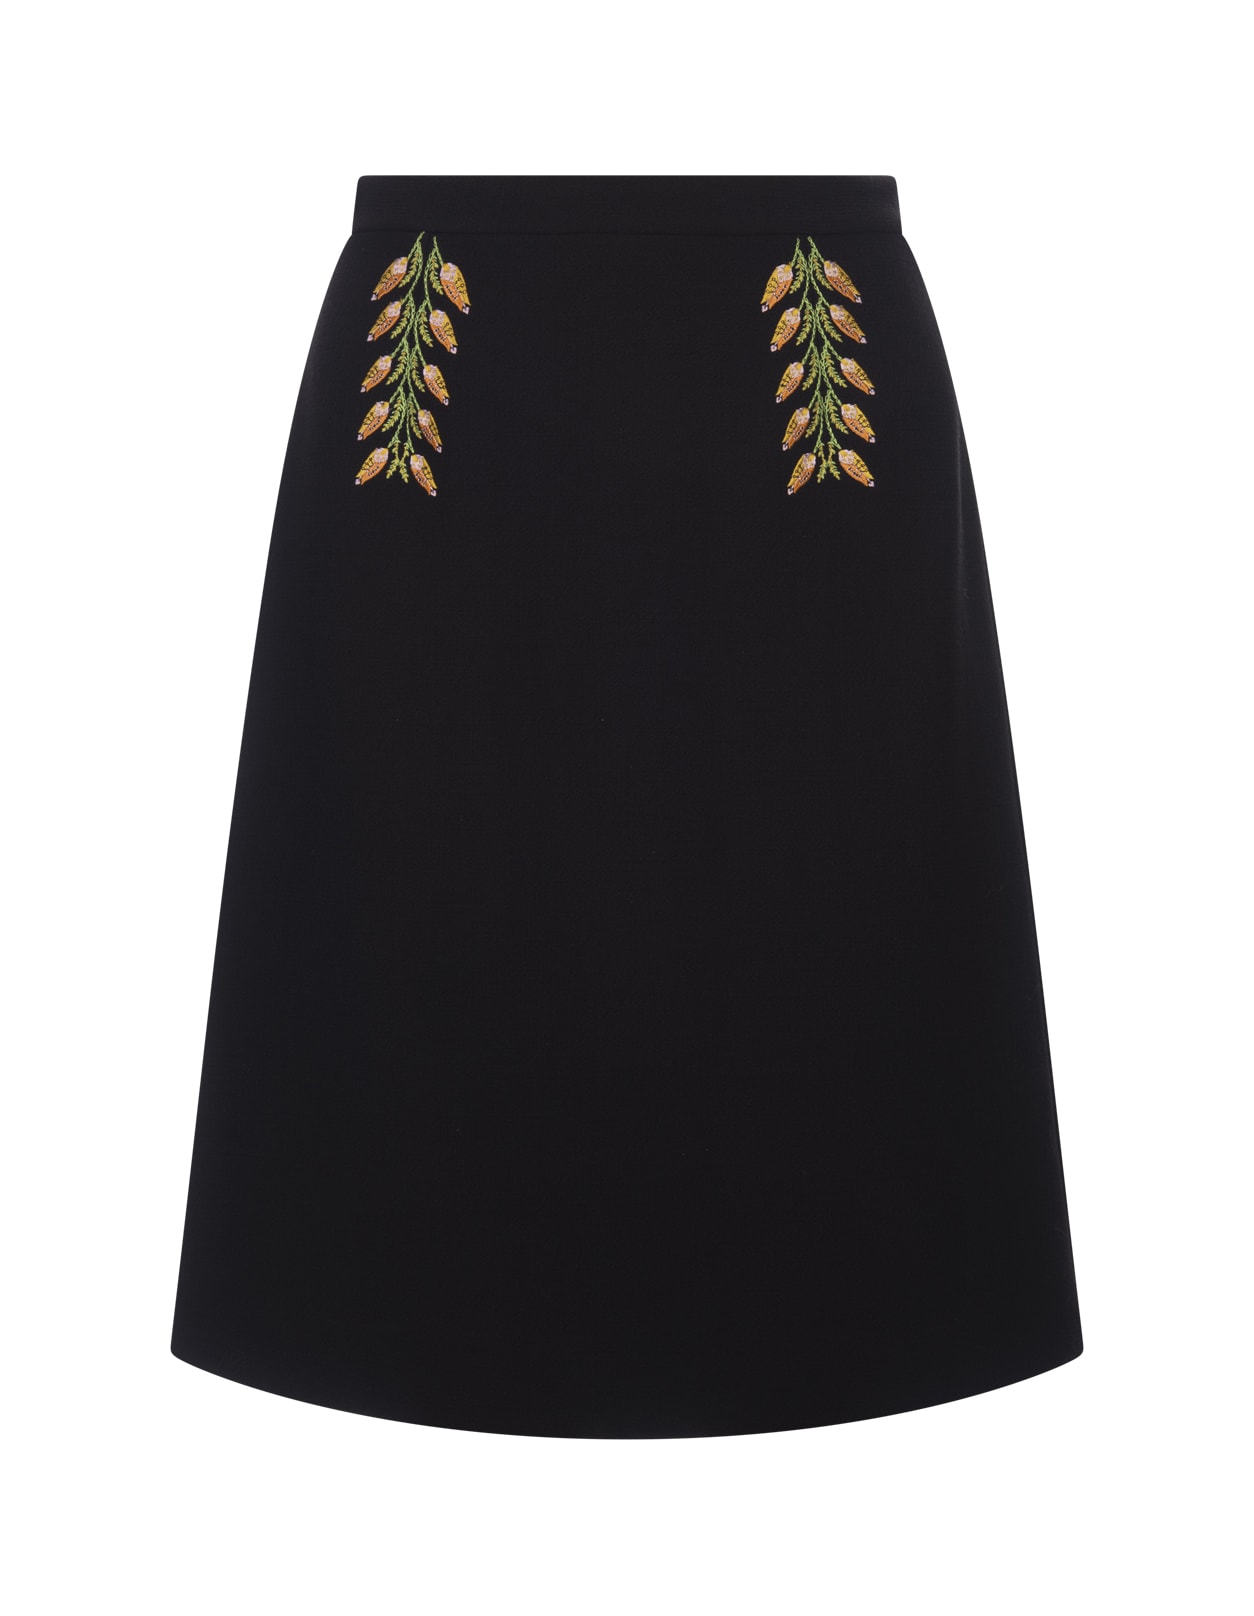 ETRO BLACK PENCIL SKIRT WITH FOLIAGE EMBROIDERY